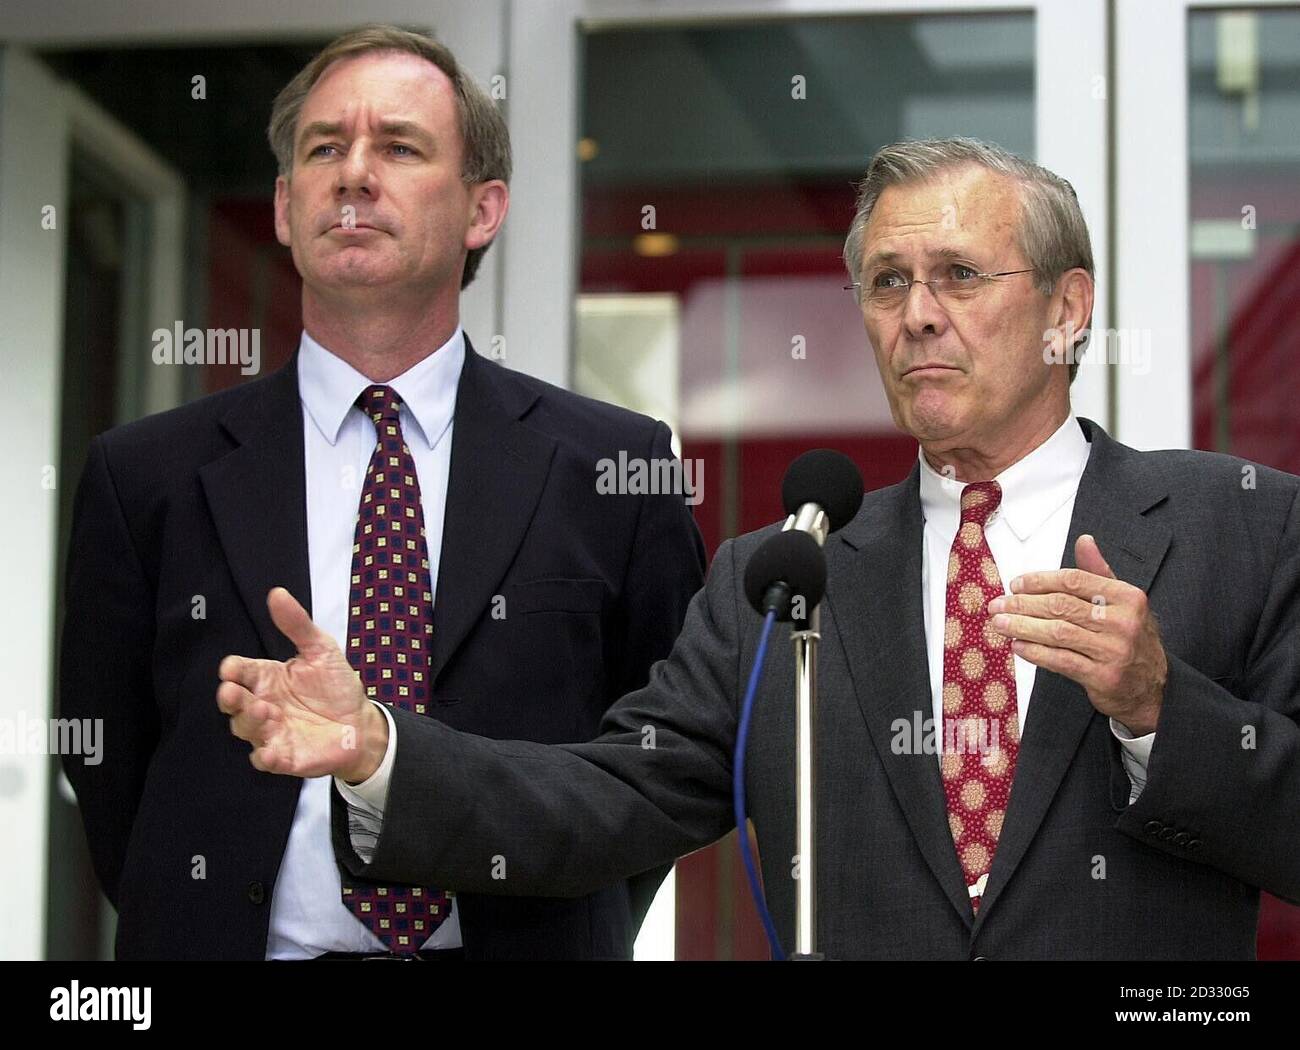 U.S. Defense Secretary Donald Rumsfeld (right) at a news conference with Britain's Secretary of State for Defence Geoff Hoon at London's Heathrow Airport. Mr Rumsfeld was in Britain for talks with Prime Minister Tony Blair.  * ...  during the last stop on a trip that has taken him to the Persian Gulf and Afghanistan.  Watch for PA story. PA Photo: Michael Stephens / WPA ROTA. Stock Photo